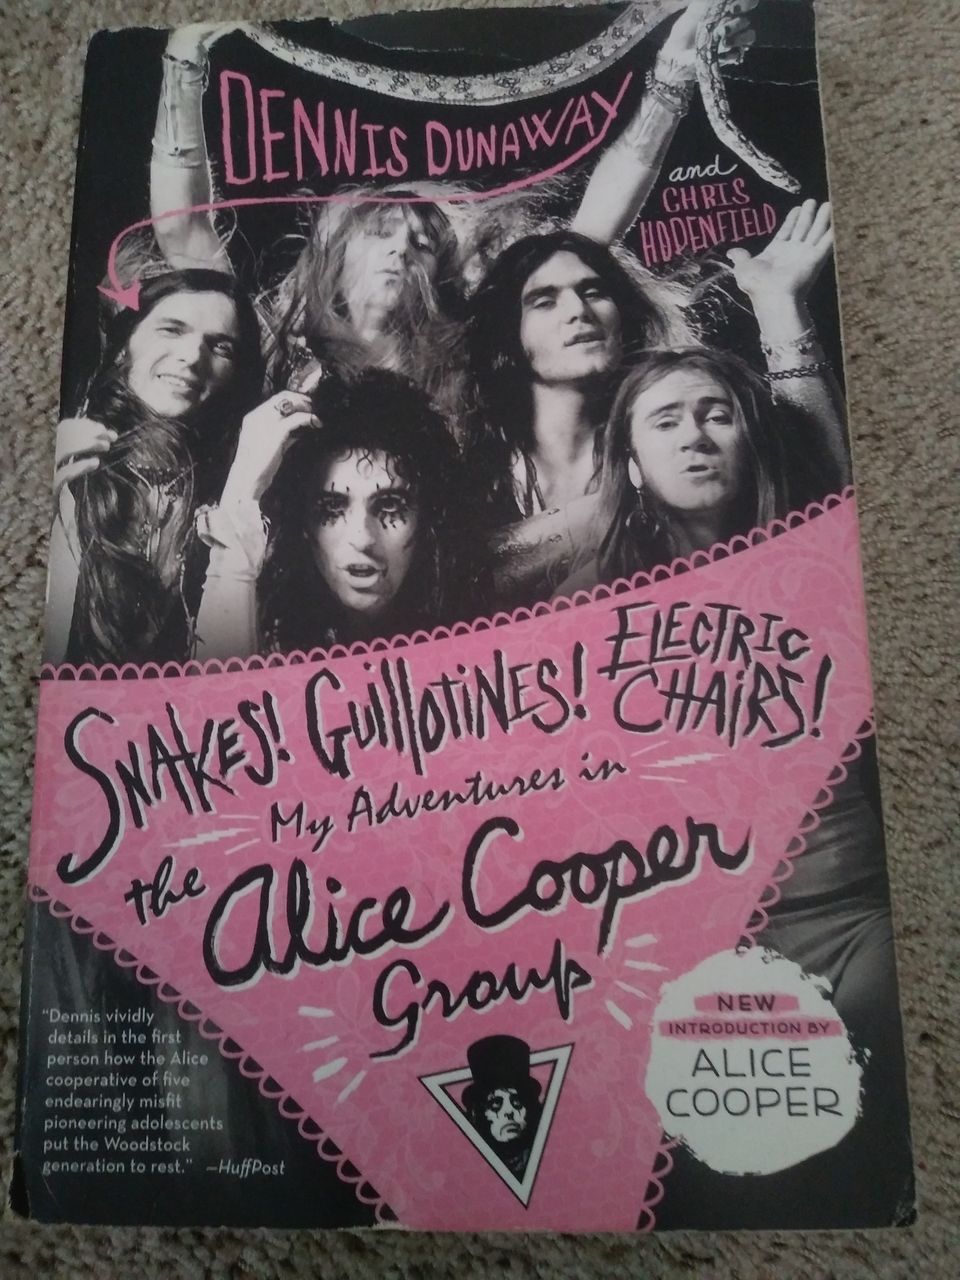 Snakes! Guillotines! Electric Chairs! My Adventure with The Alice Cooper Group